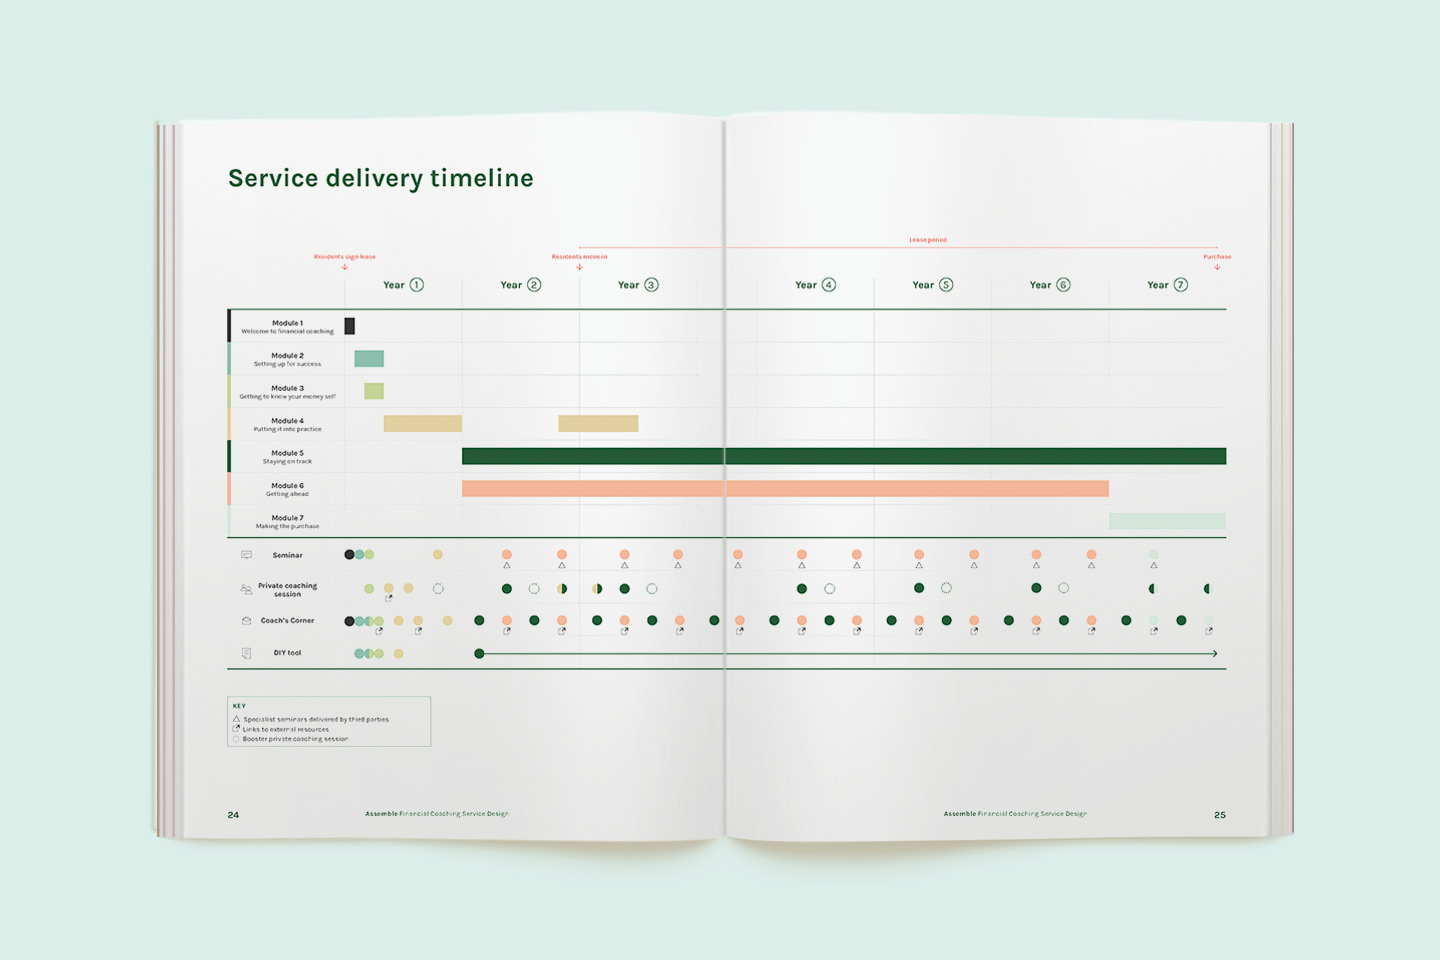 Spread from the report showing a timeline of service delivery